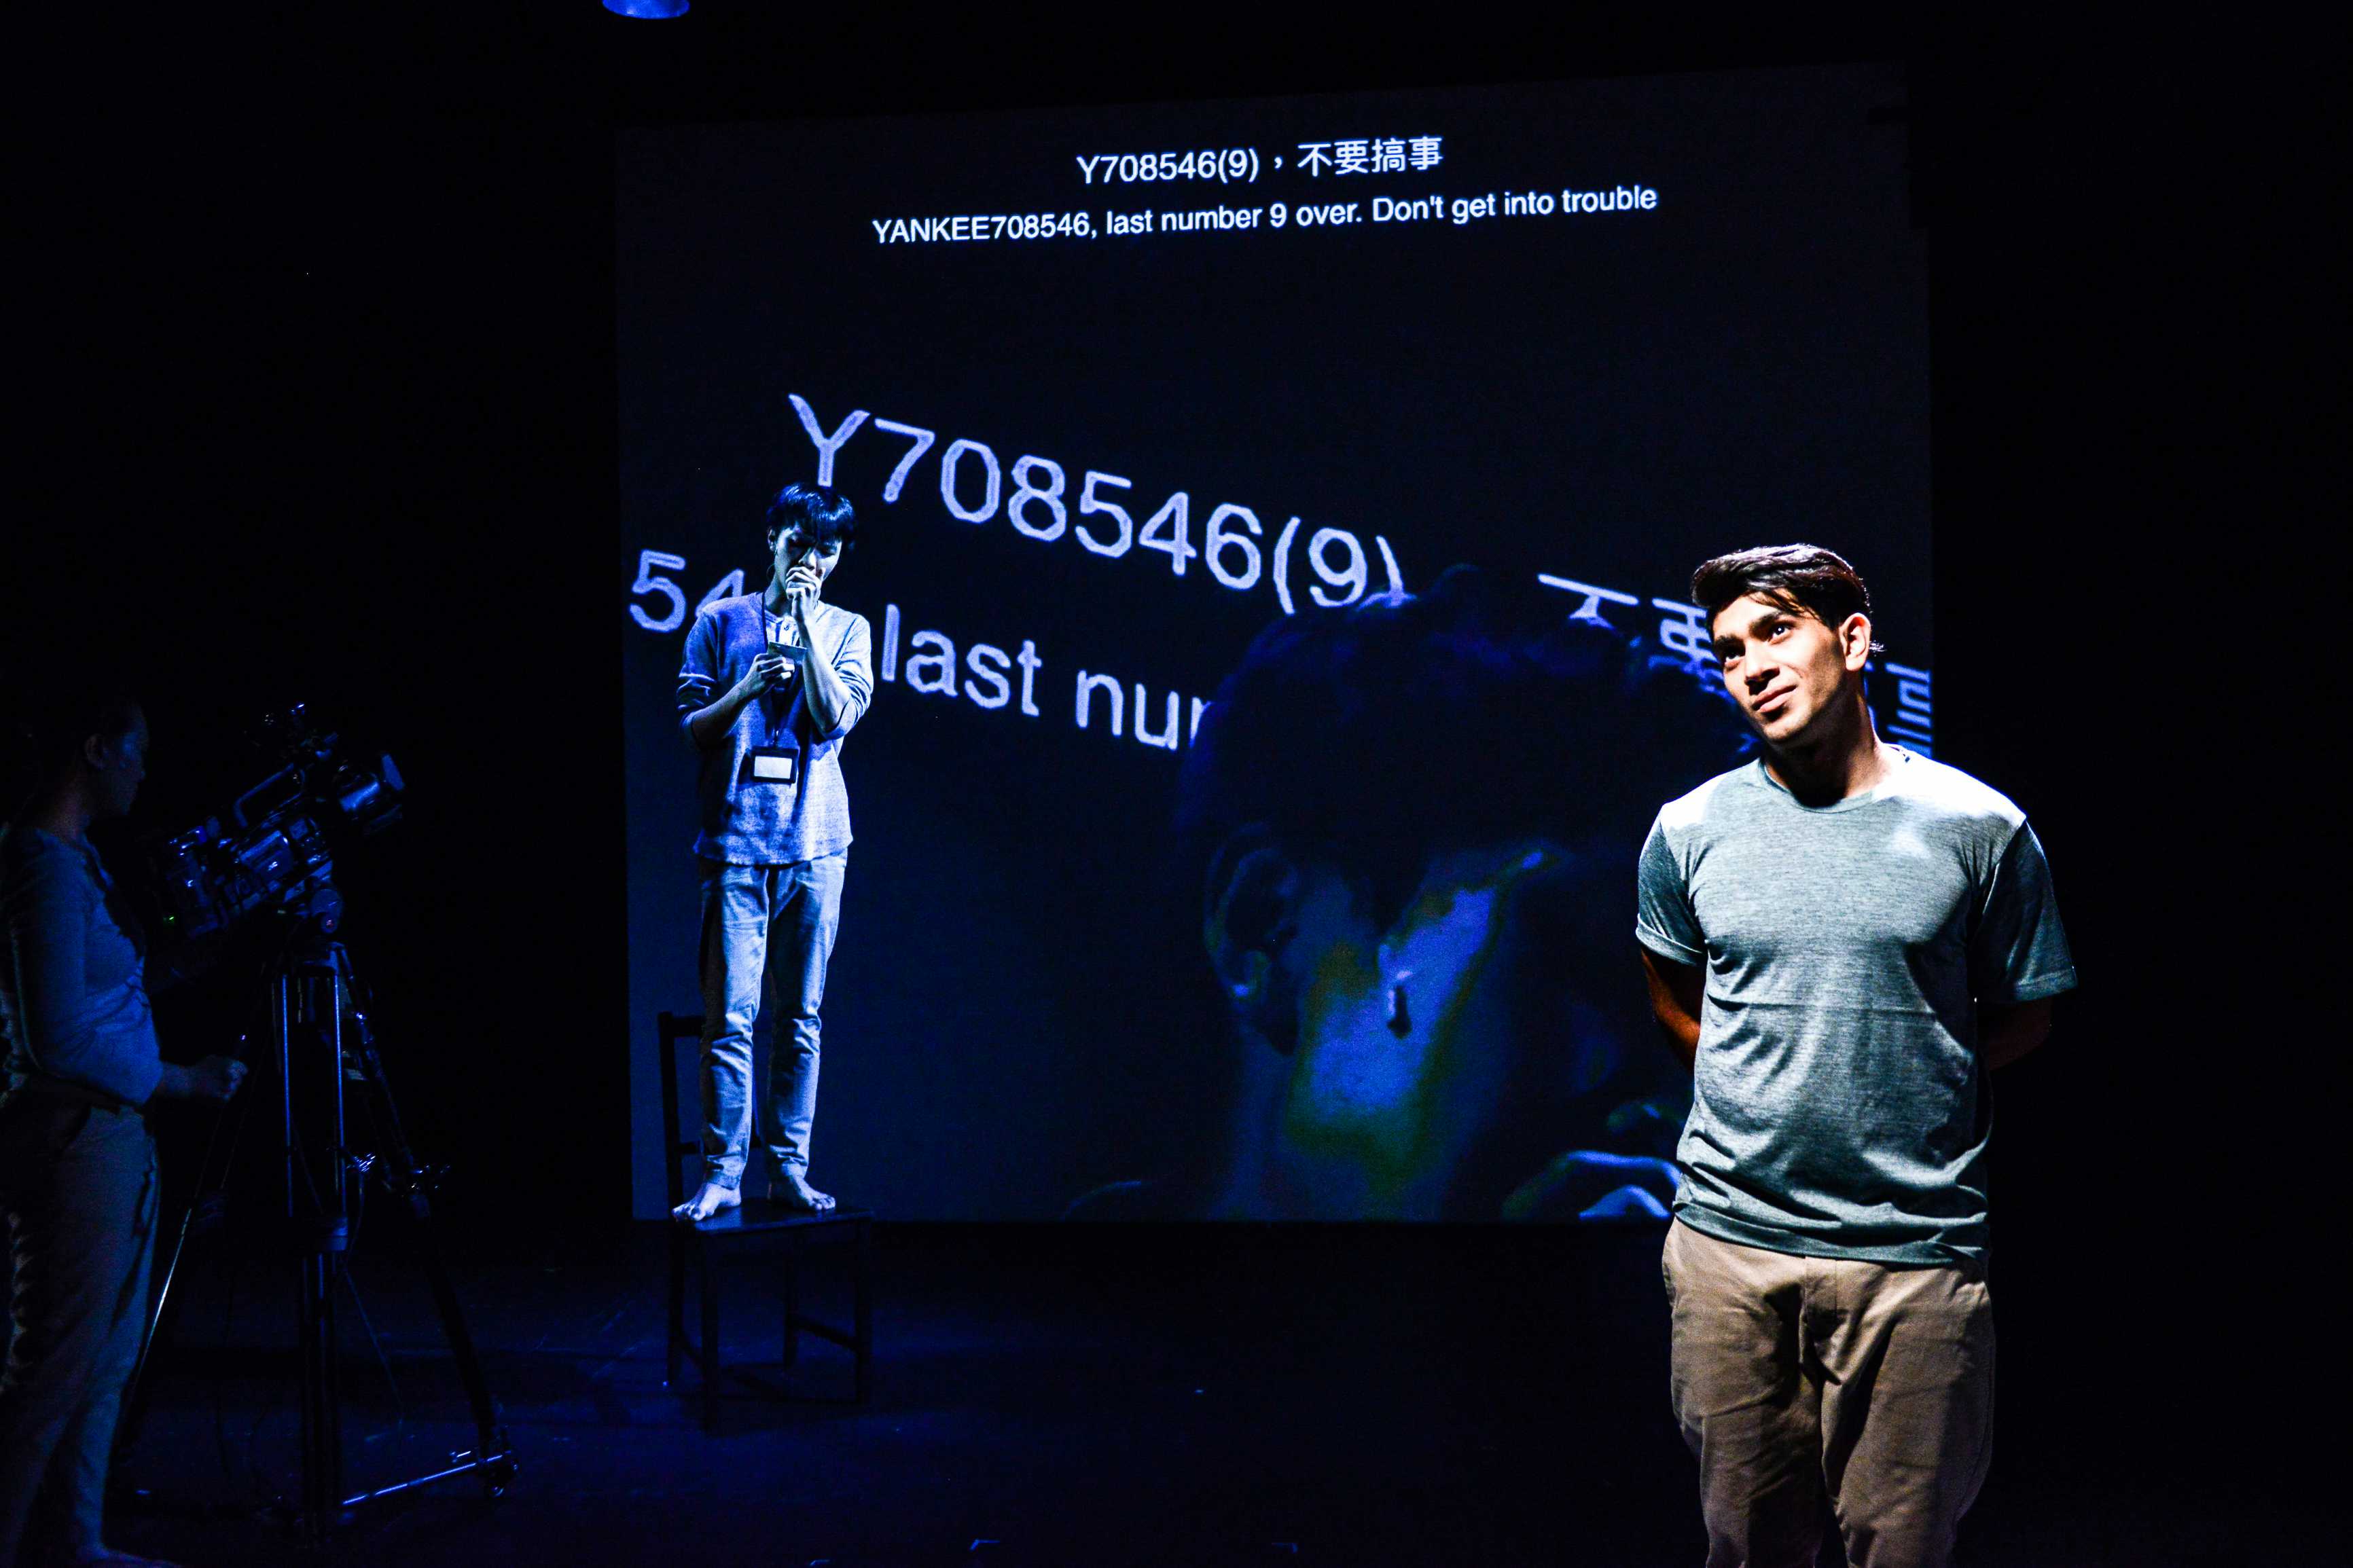 Anyway, that was the only funny experience I had with the police | Featuring: Mohammad Kashif Ali, Ng King Lung | Tagged as: Show, Testimony | Photo: Fung Wai Sun |  (Rooftop Productions • Hong Kong Theatre Company)  | Rooftop Productions • Hong Kong Theatre Company